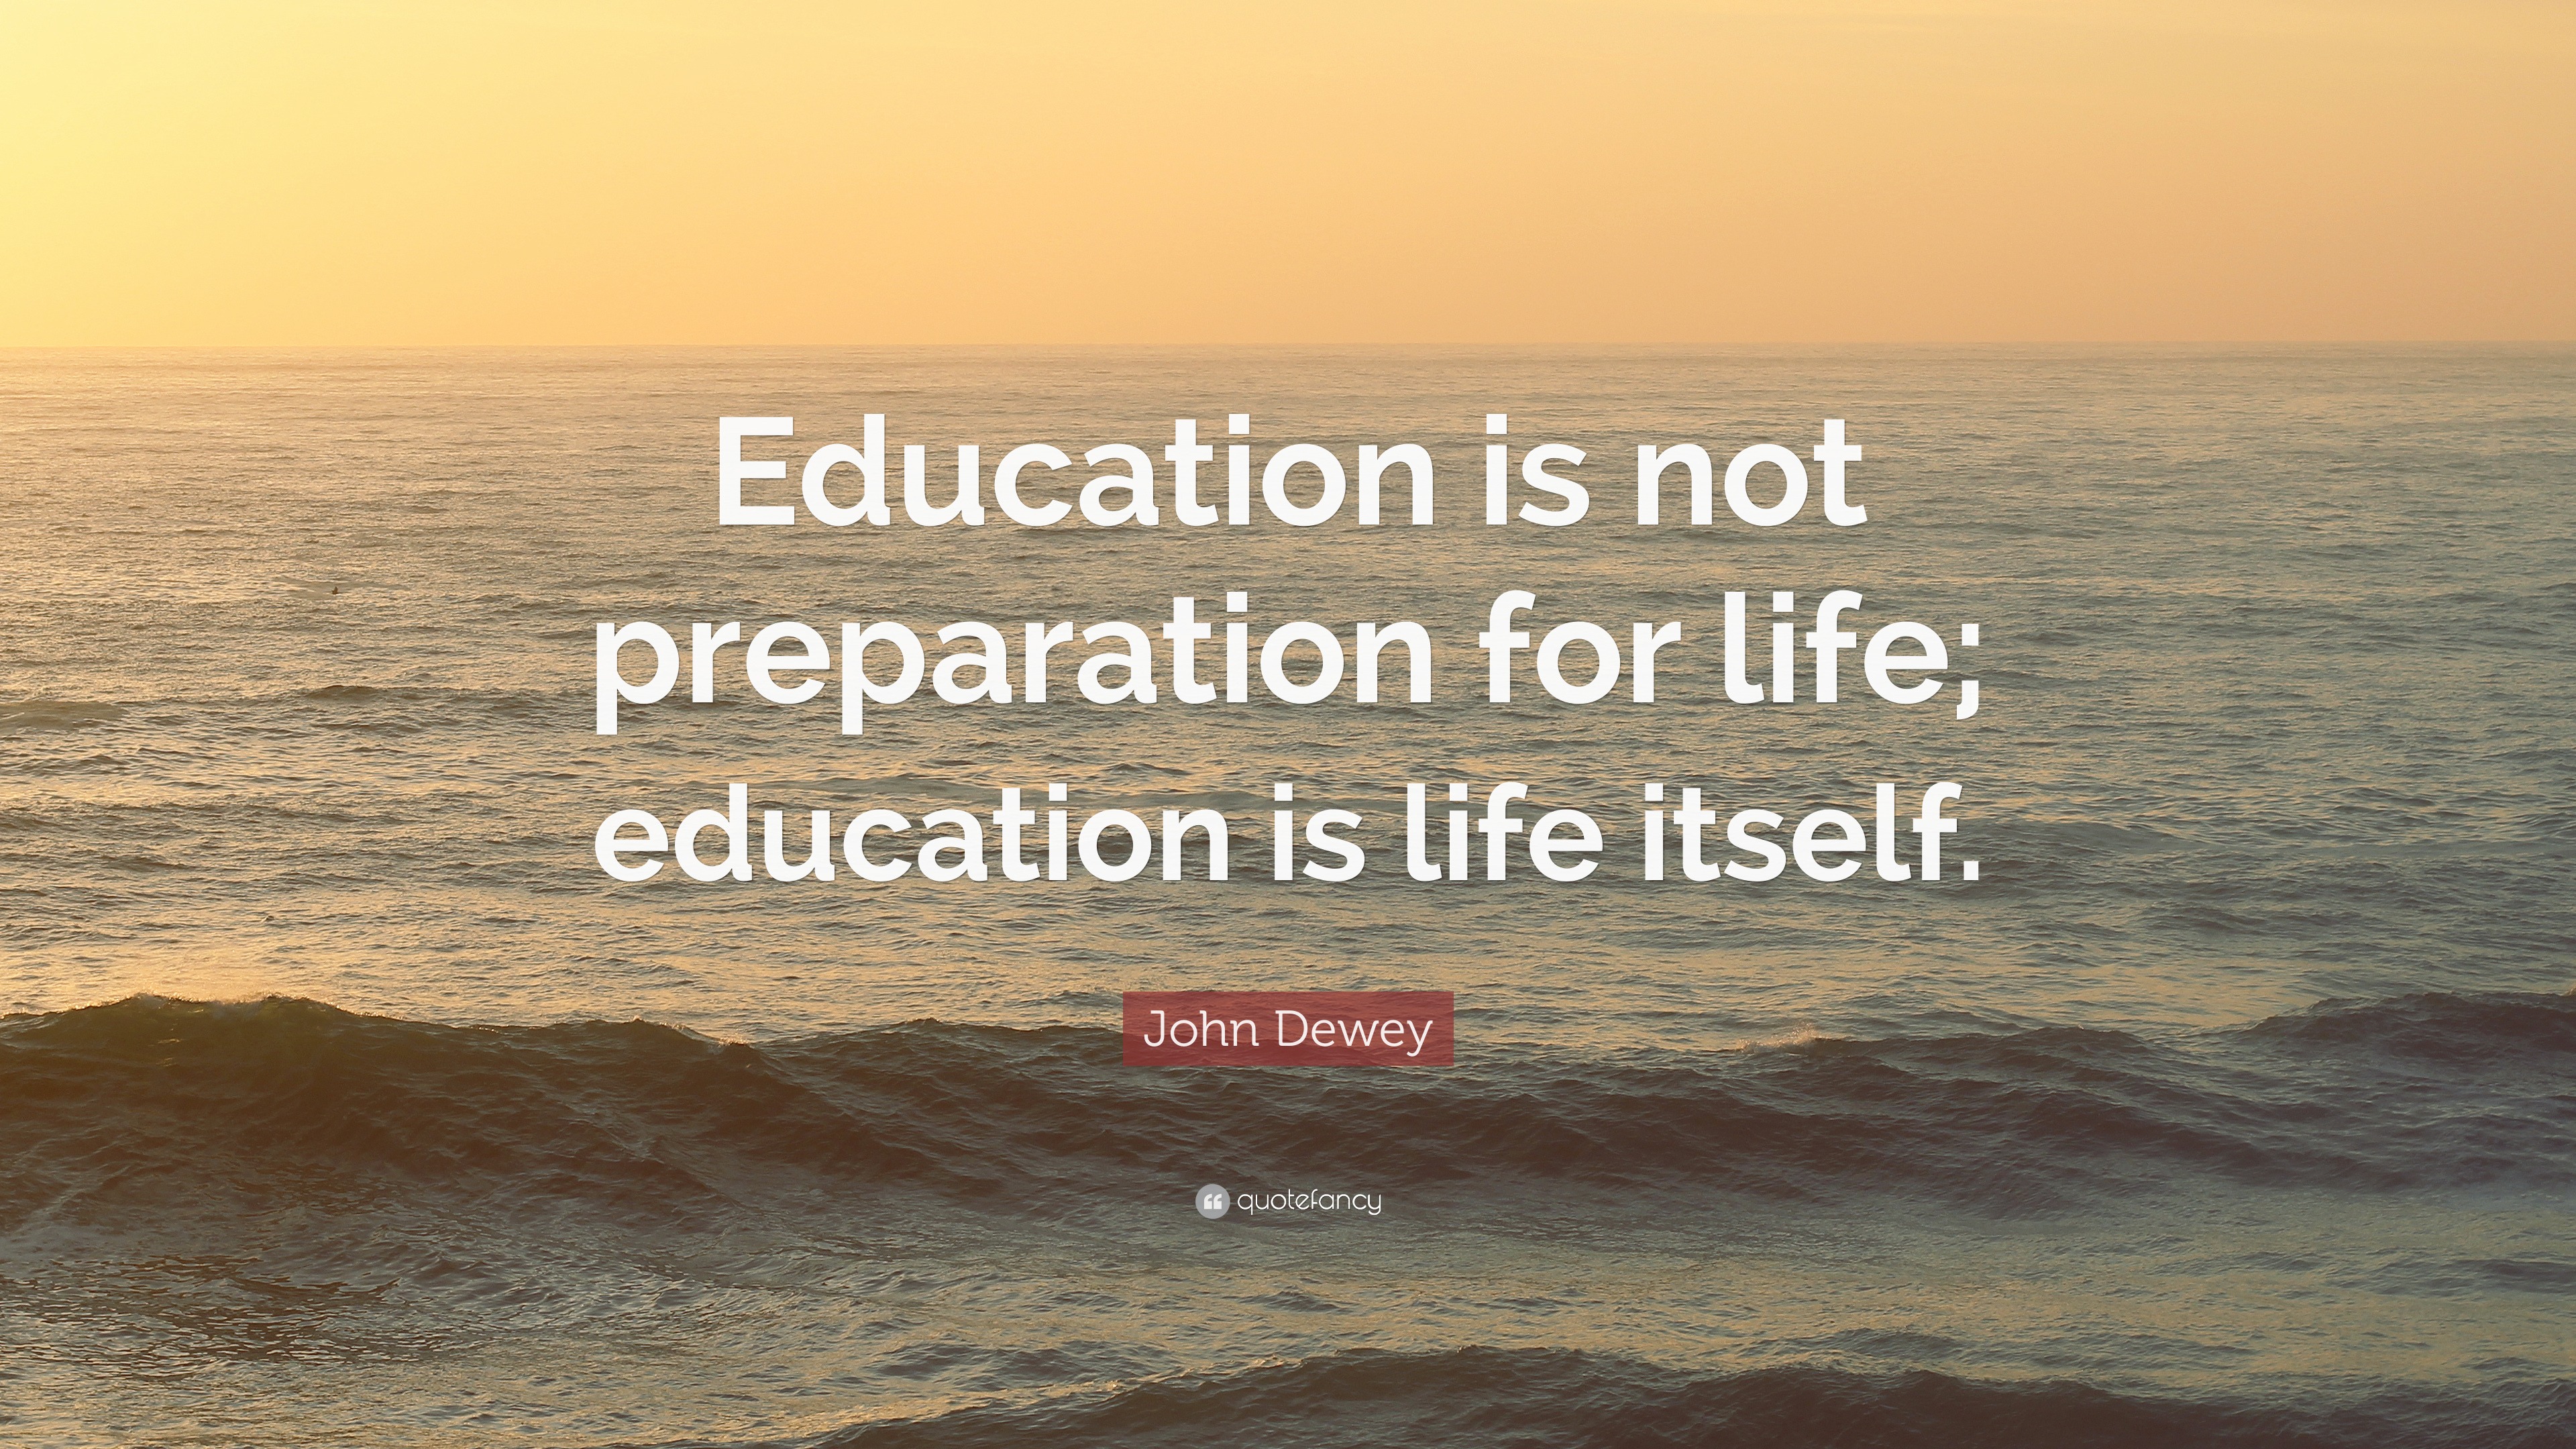 John Dewey Quote: “Education is not preparation for life; education is ...